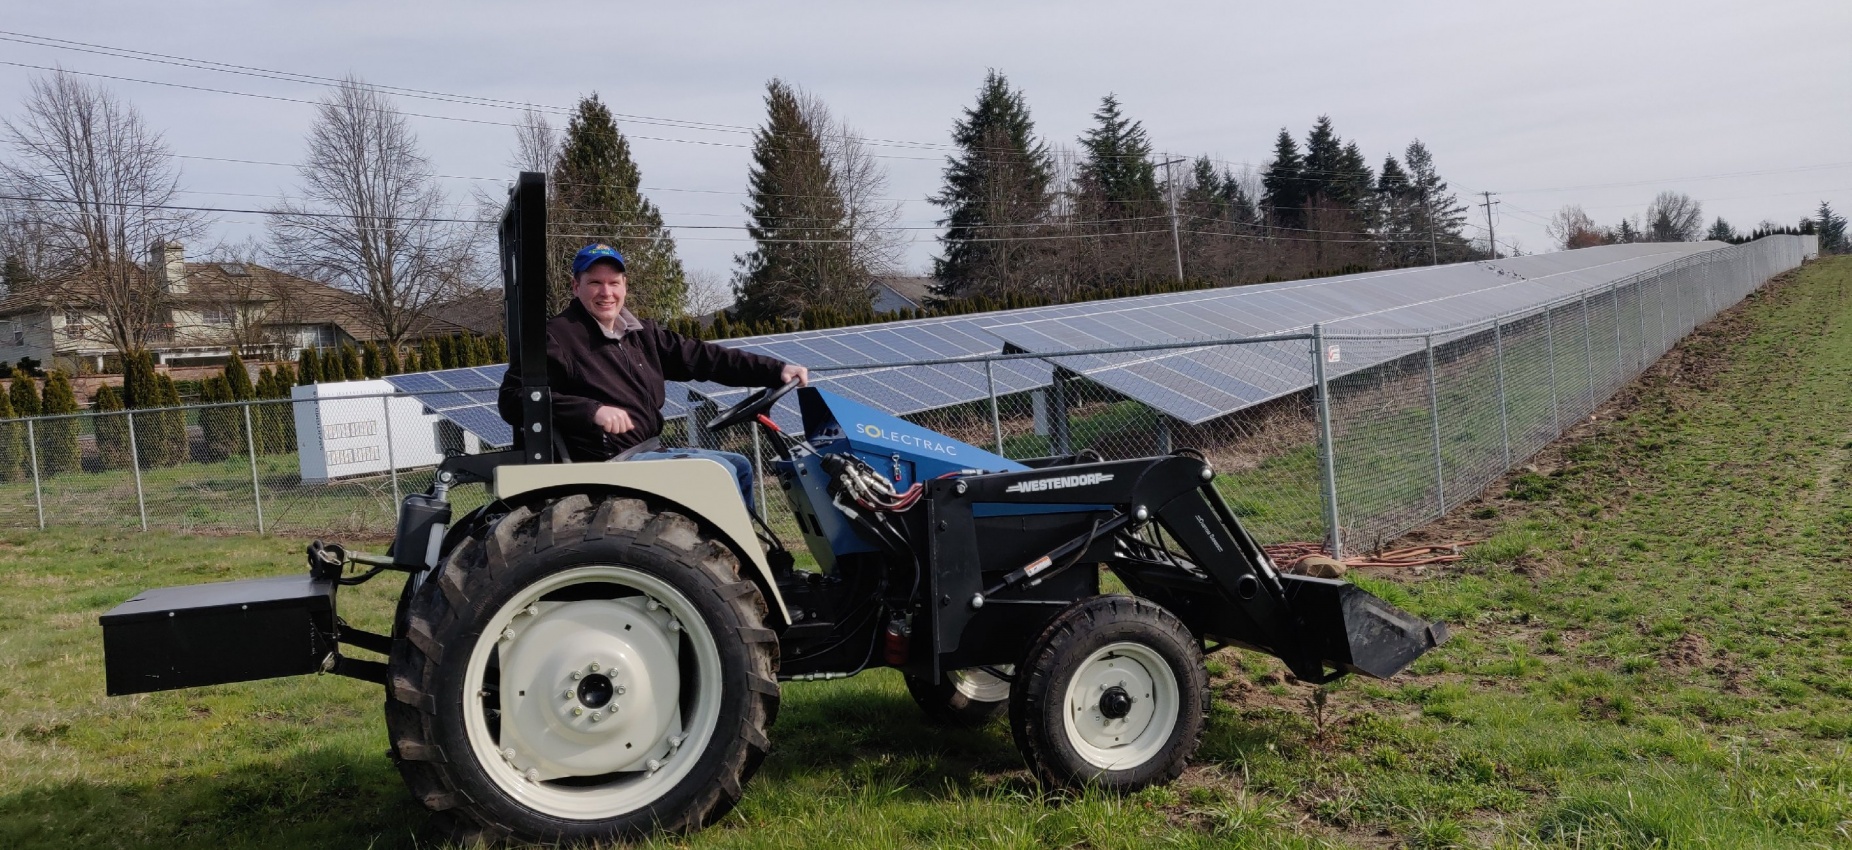 Man atop an electric tractor on a farm with solar panels in the background